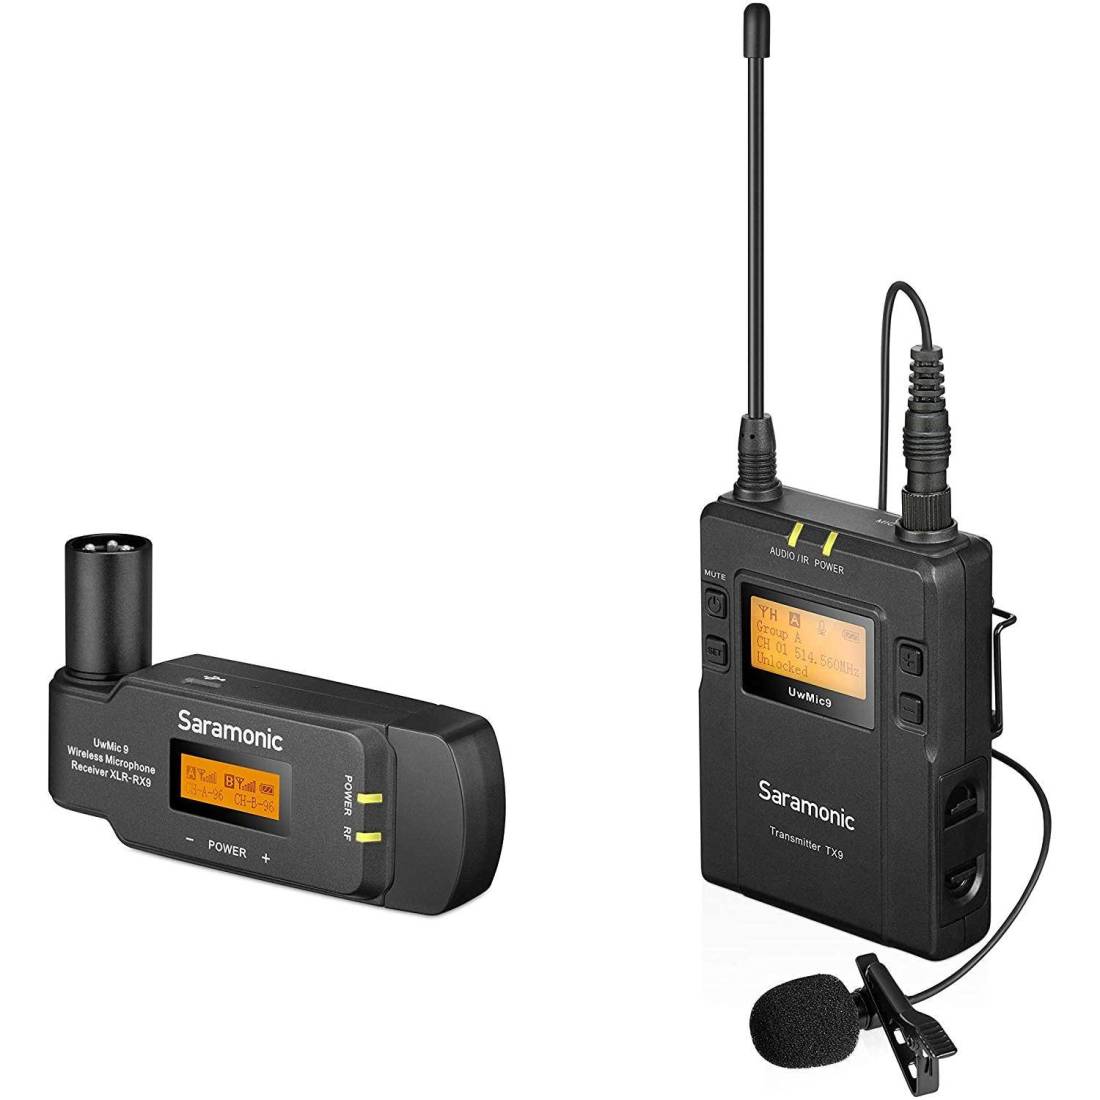 UwMic9 Wireless Lavalier Microphone System with Plug-In Receiver - Single Transmitter